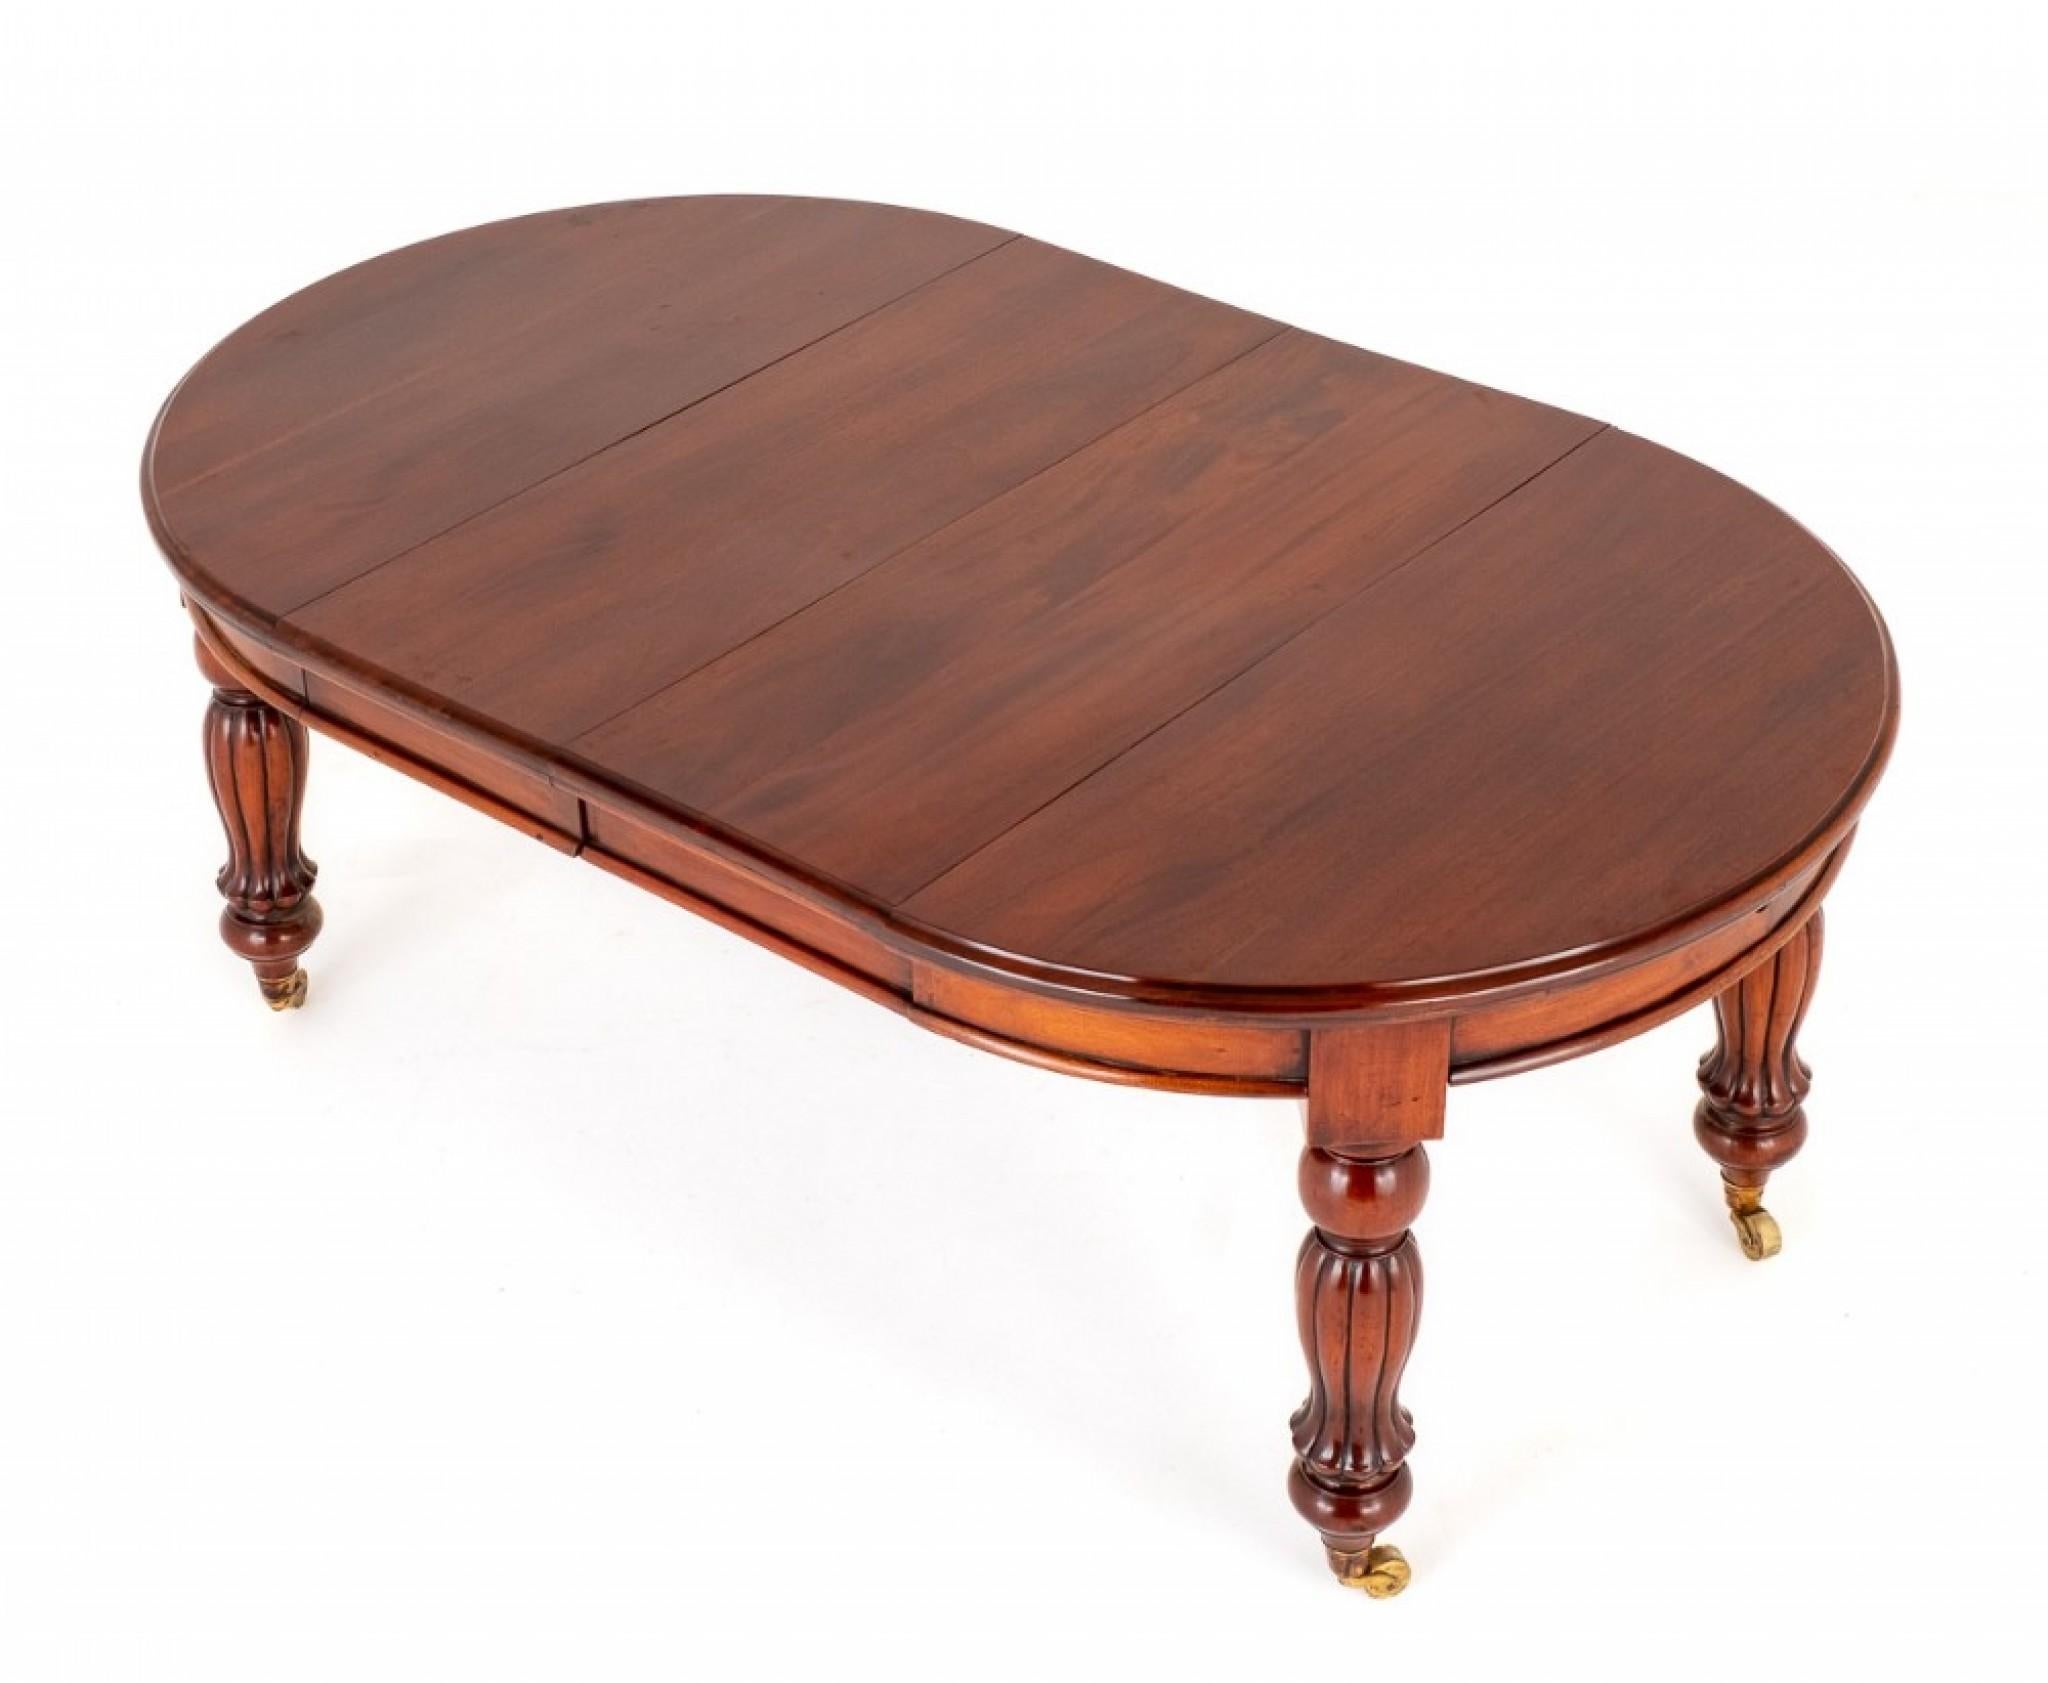 Victorian Mahogany 2 Leaf Circular Extending Dining Table.
Raised upon Turned and Fluted Legs with Brass Castors.
Circa 1860
The Table Extends by way of a Wind Out Telescopic Mechanism to Receive up to 2 Extra Leaves.
Presented in good condition